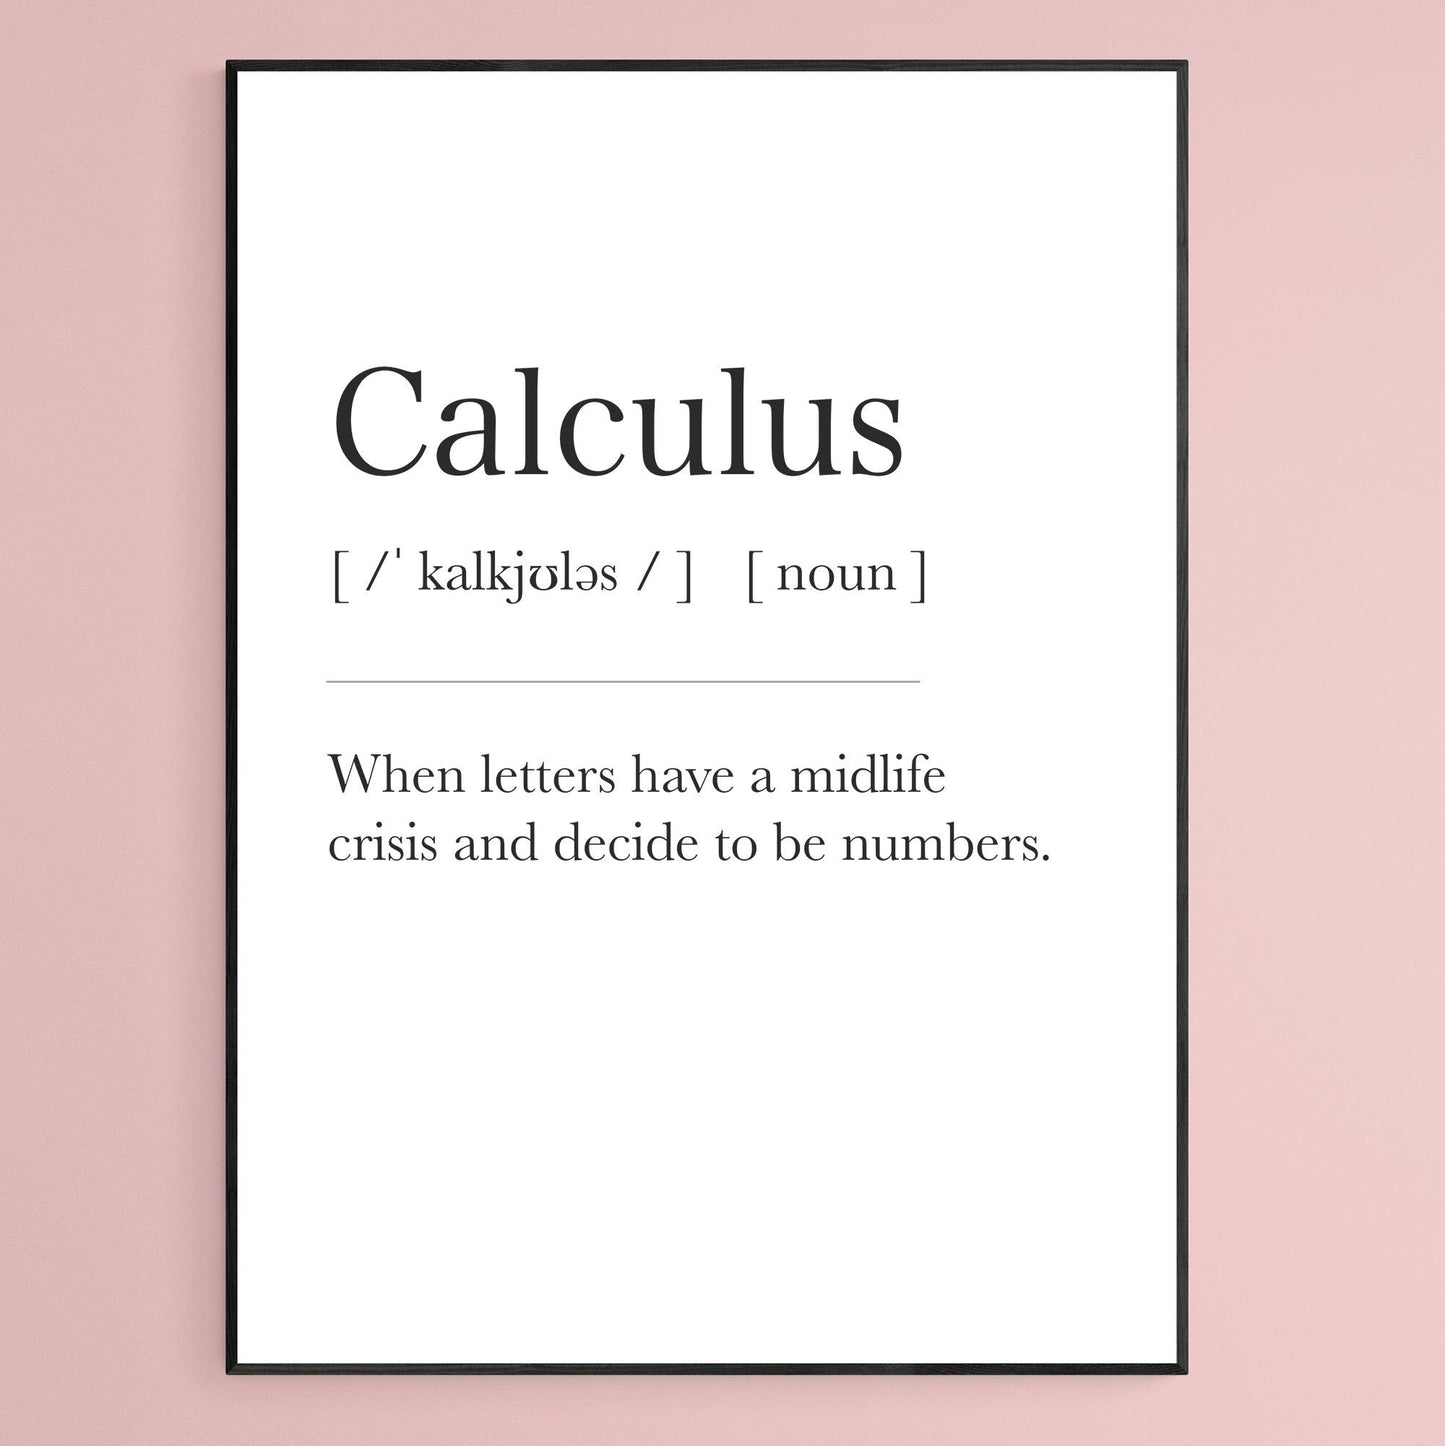 Calculus Definition Print, Dictionary Art , Definition Meaning Print Quote, Motivational Poster Wall Art Decor, Best Gift For Best Friend